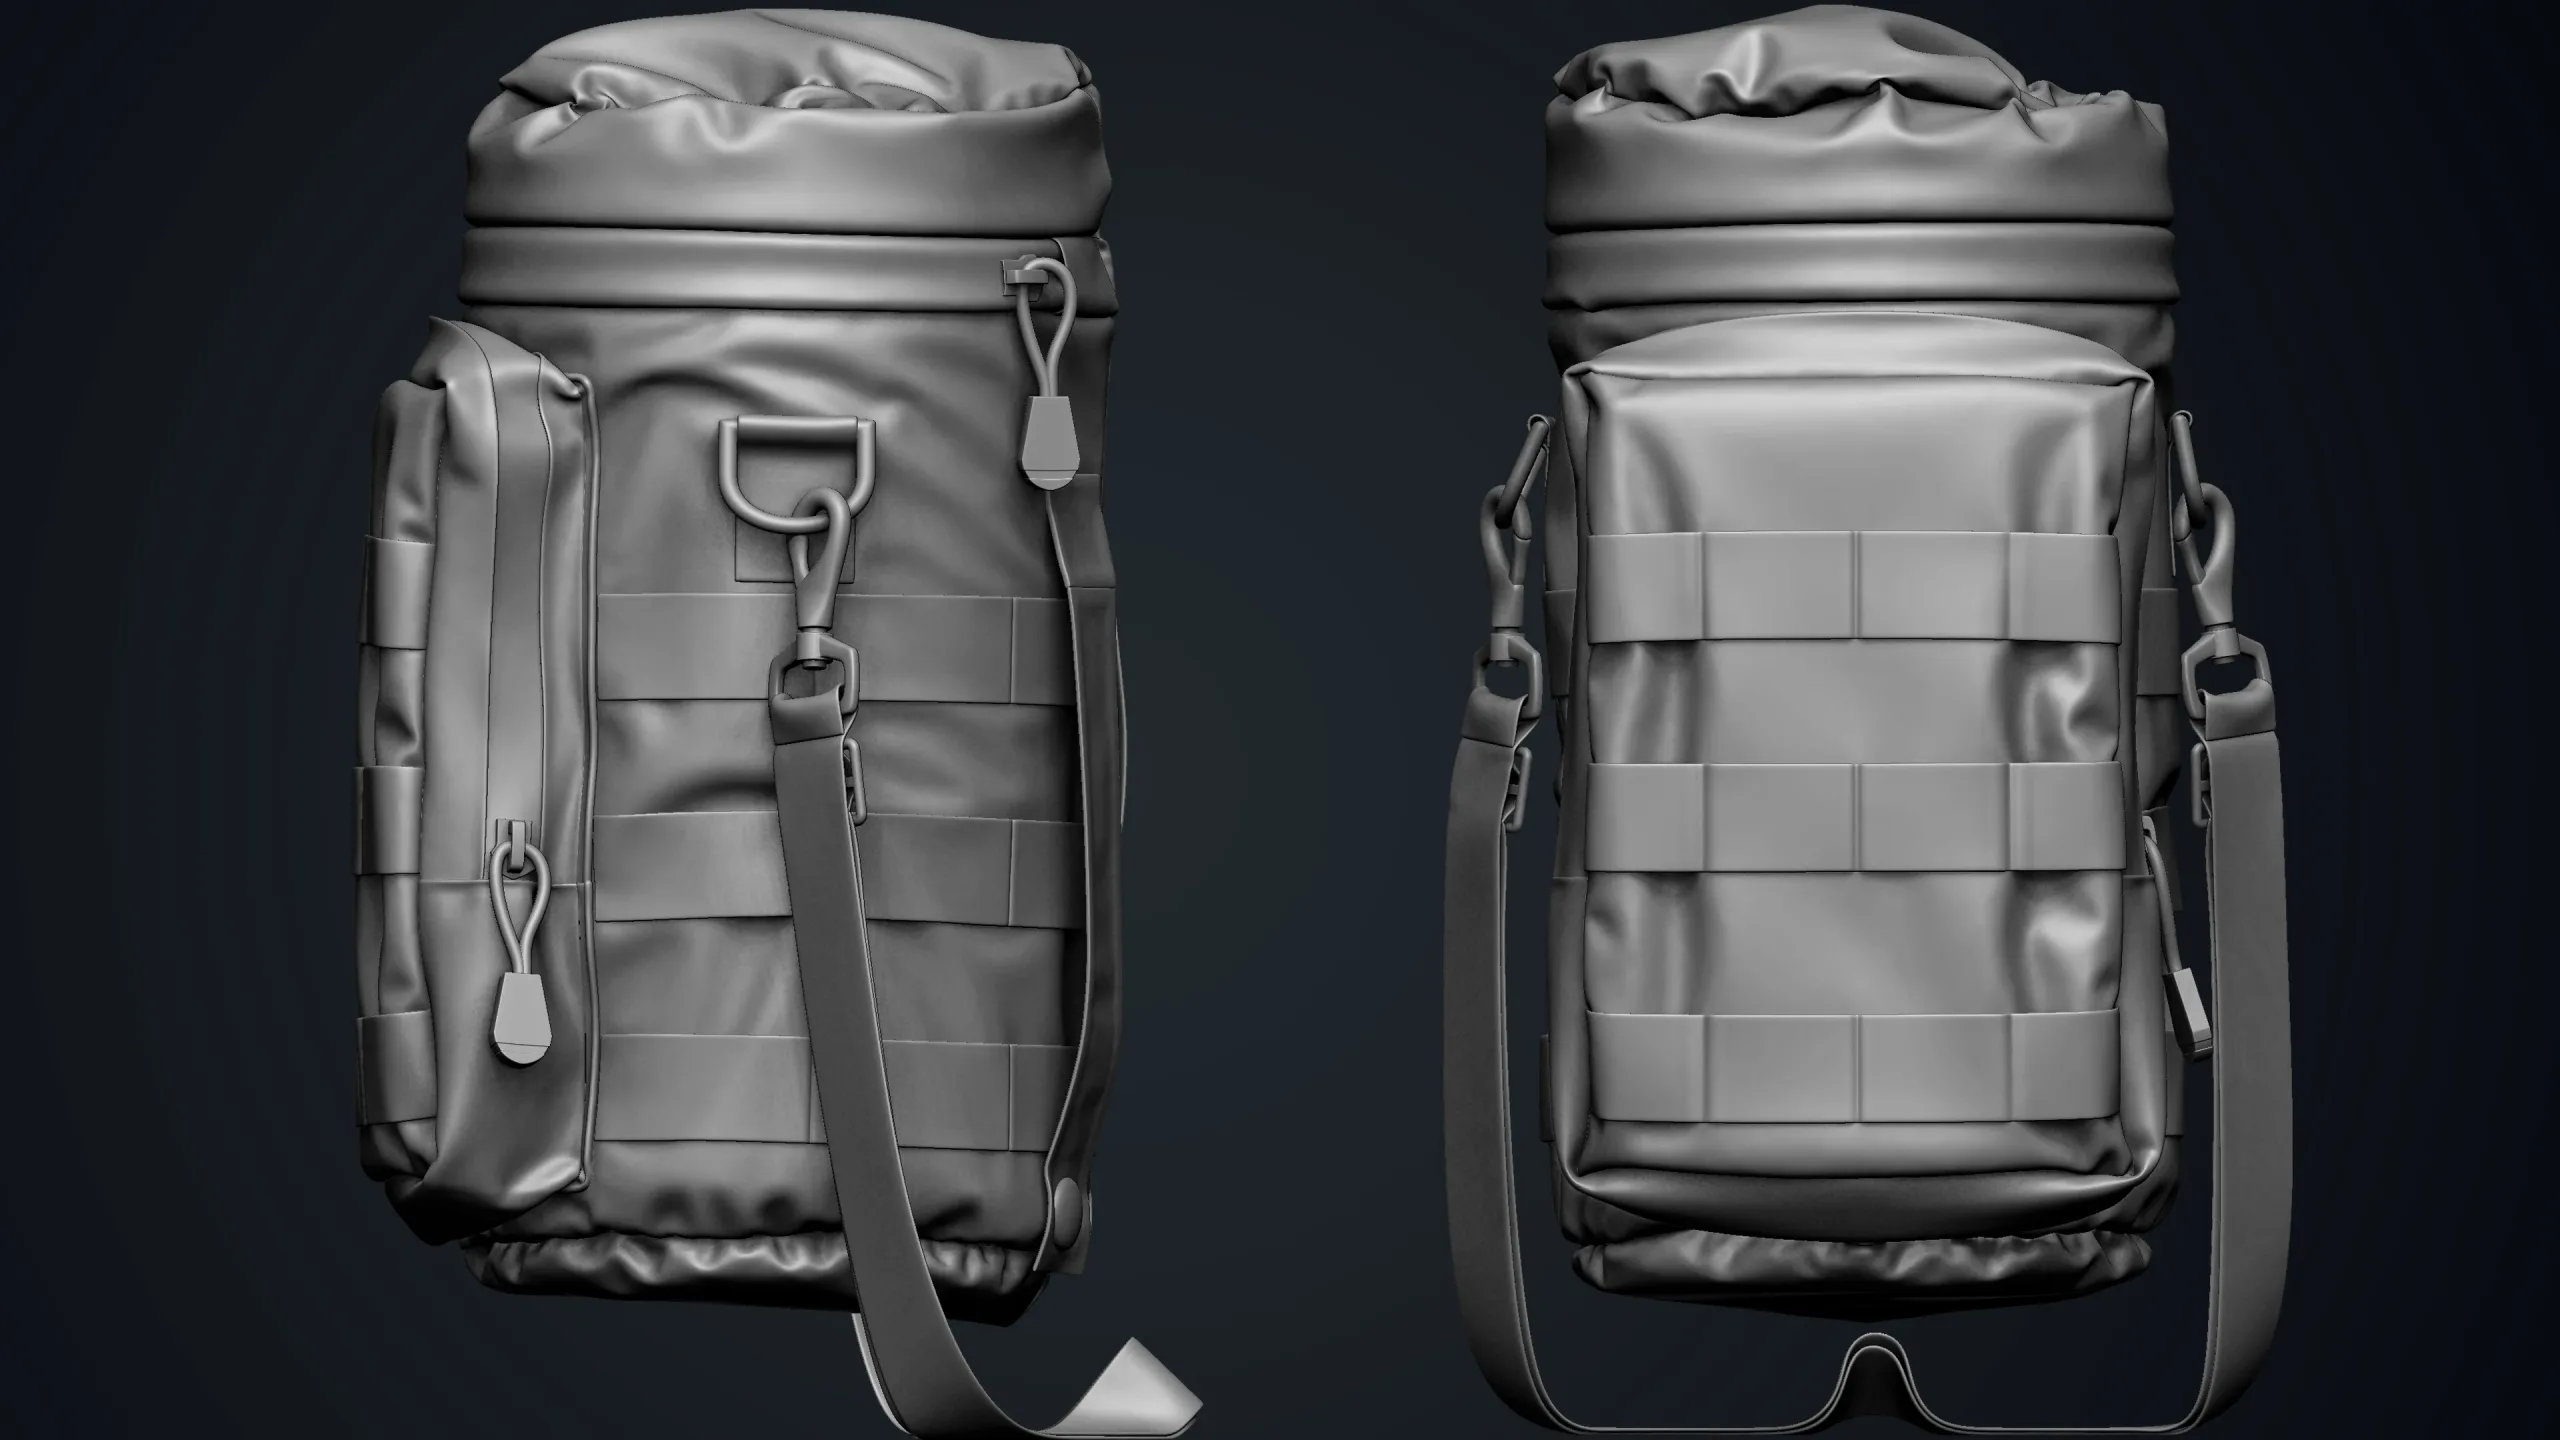 Realistic- Water Bottle Pouch Full Creation Process Video Tutorial ( +9 Hours ) + Project Files Vol.01